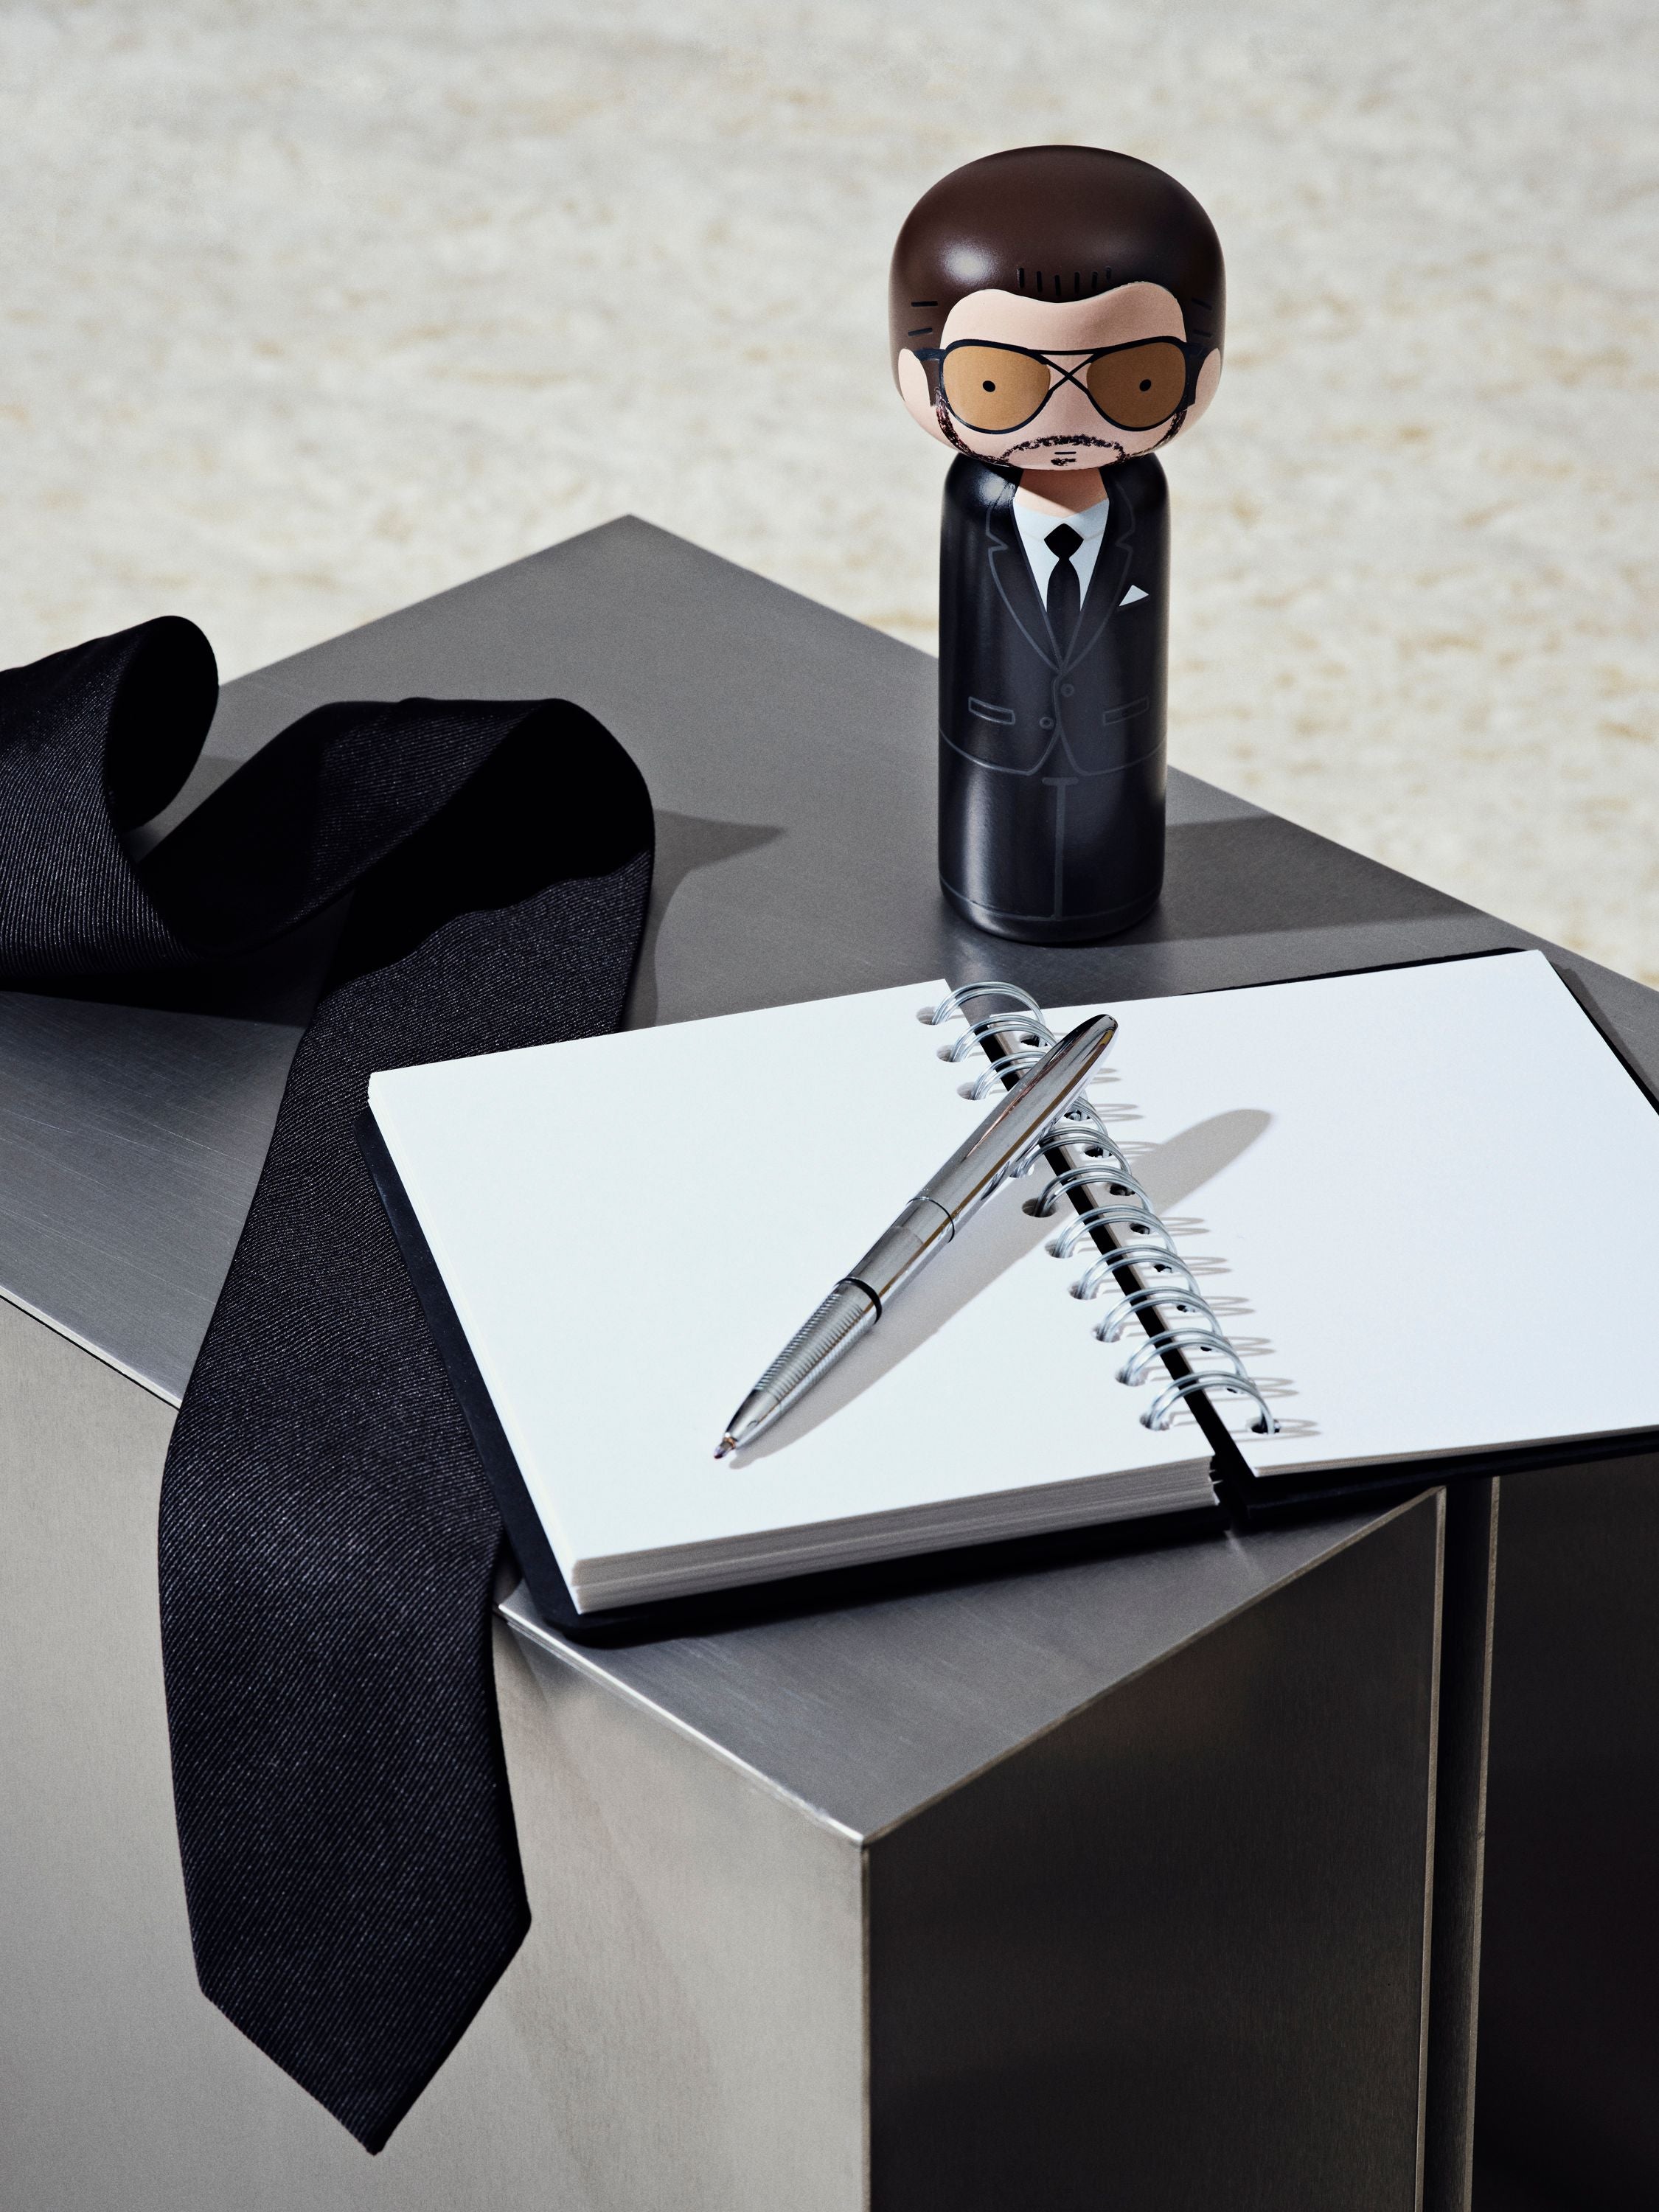 Kokeshi Doll by Sketch.Inc for Lucie Kaas - Tom Ford